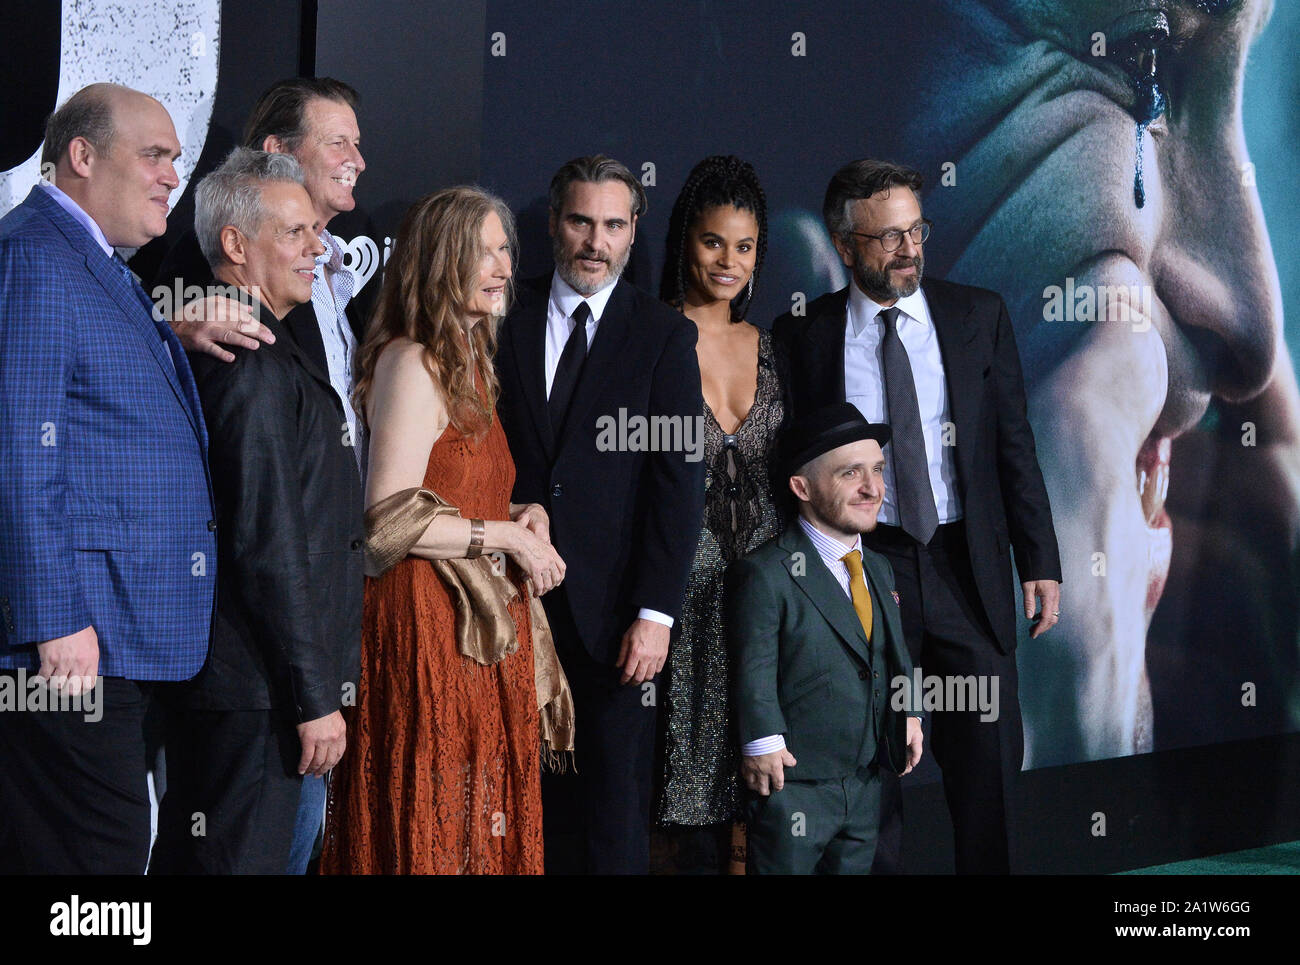 Cast members Glenn Fleshler, Josh Pais, Brett Cullen, Frances Conroy, Joaquin Phoenix, Zazie Beetz, Leigh Gill and Marc Maron (L-R) attend the premiere of the motion picture thriller 'Joker' at the TCL Chinese Theatre in the Hollywood section of Los Angeles on Saturday, September 28, 2019. Storyline: Joker centers around an origin of the iconic arch nemesis and is an original, standalone story not seen before on the big screen. Todd Phillips' exploration of Arthur Fleck (Joaquin Phoenix), a man disregarded by society, is not only a gritty character study, but also a broader cautionary tale. P Stock Photo